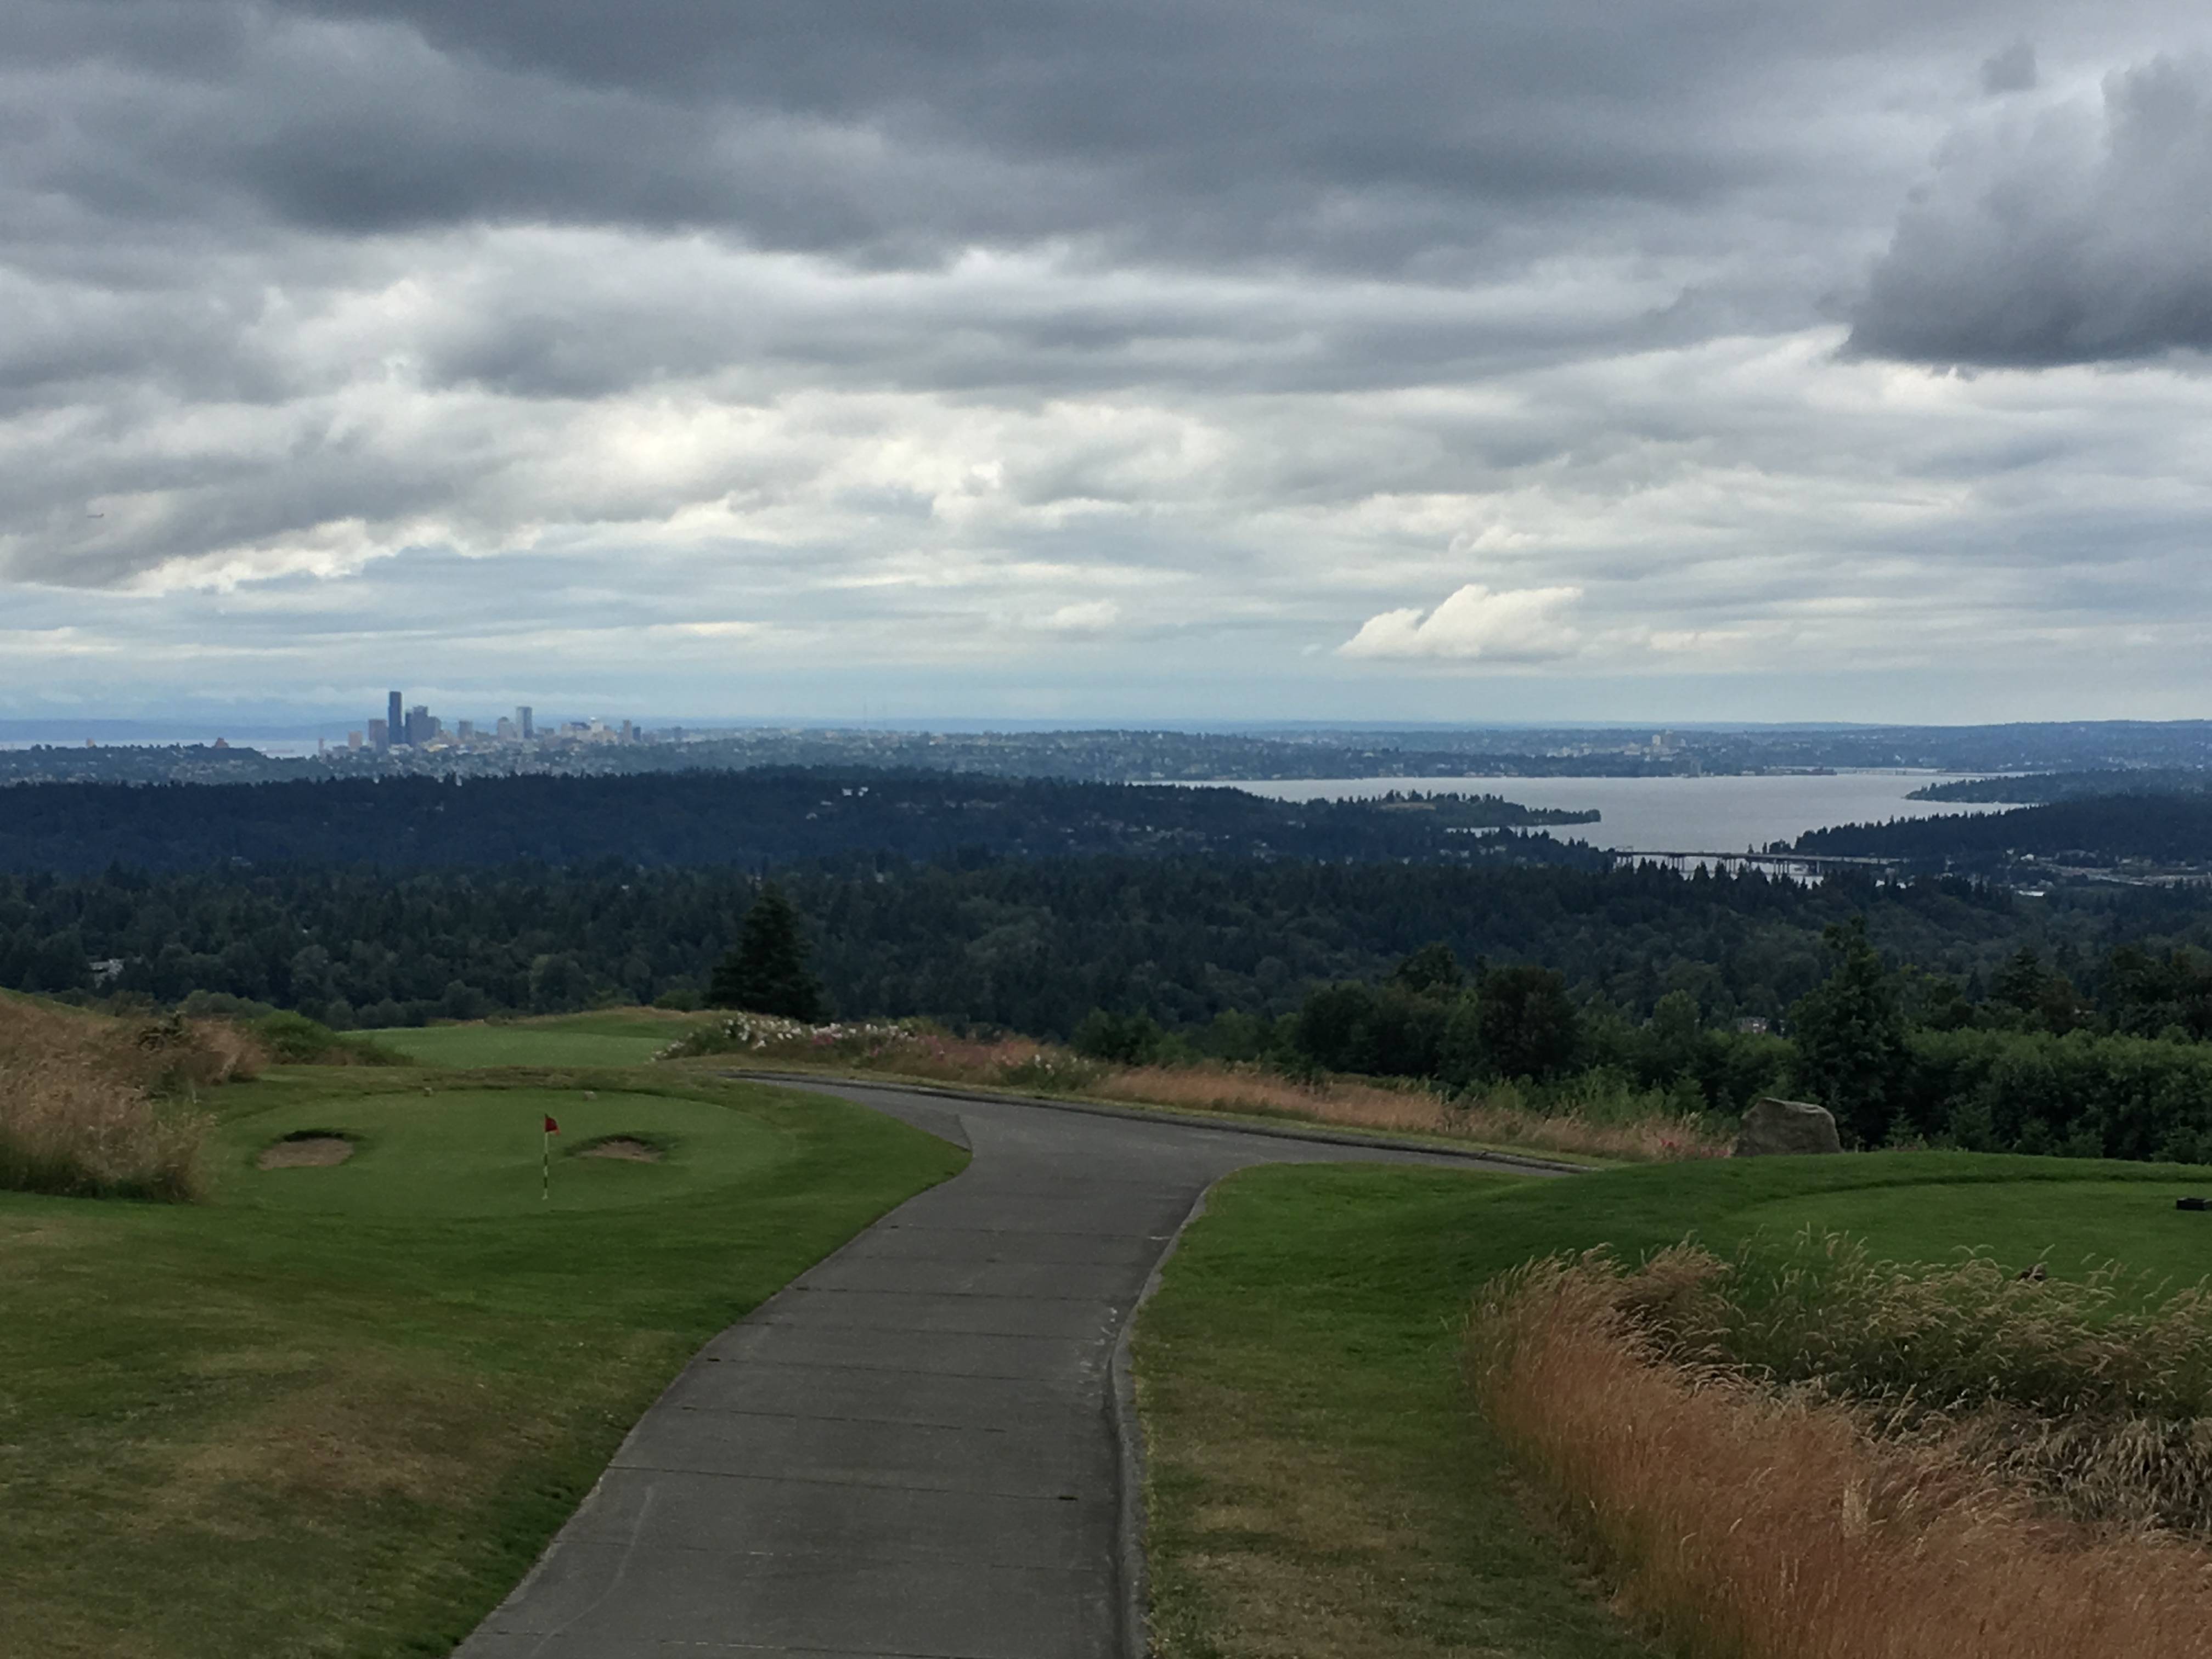 The view from the top of the climb gives fantastic vista of the Olympic Mountains, Seattle, Mercer Island, and Lake Washington.